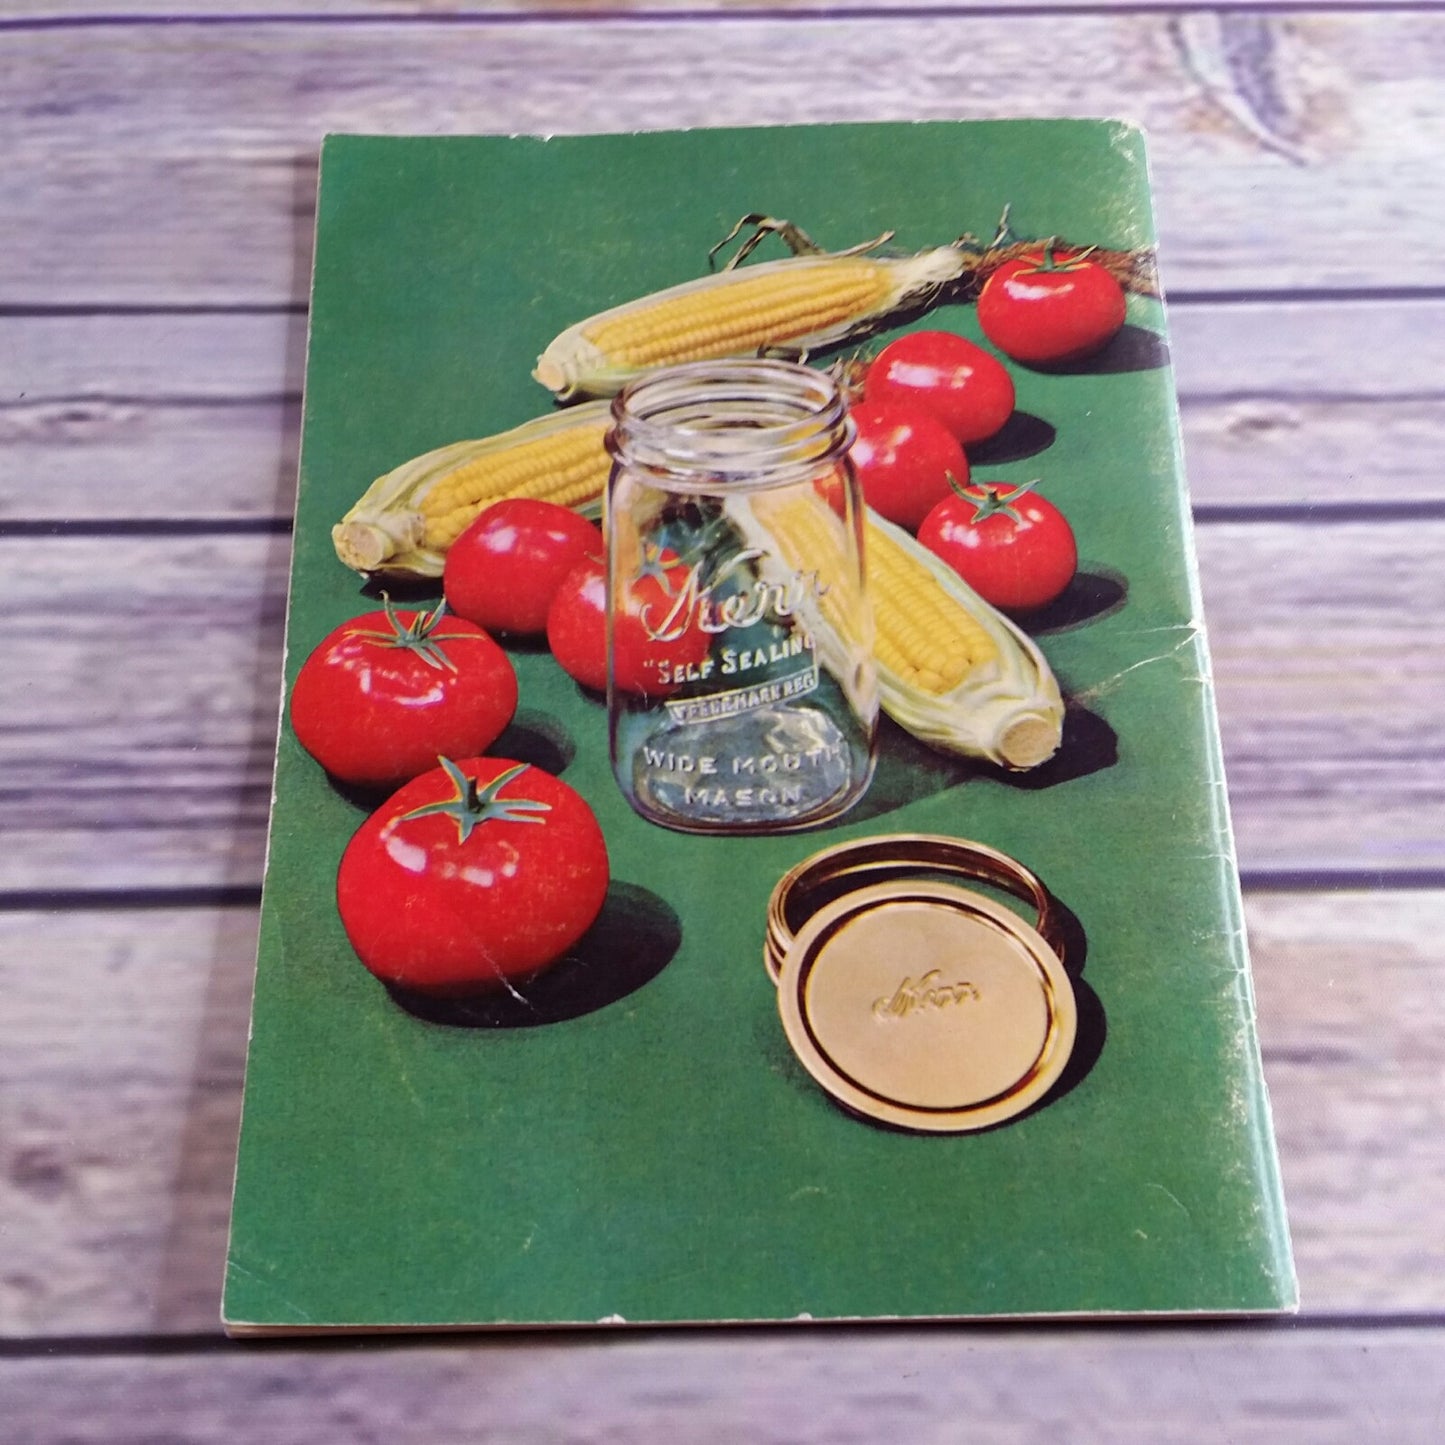 Vintage Kerr Home Canning and Freezing Cookbook Recipes 1955 Booklet Green Cover Pamphlet